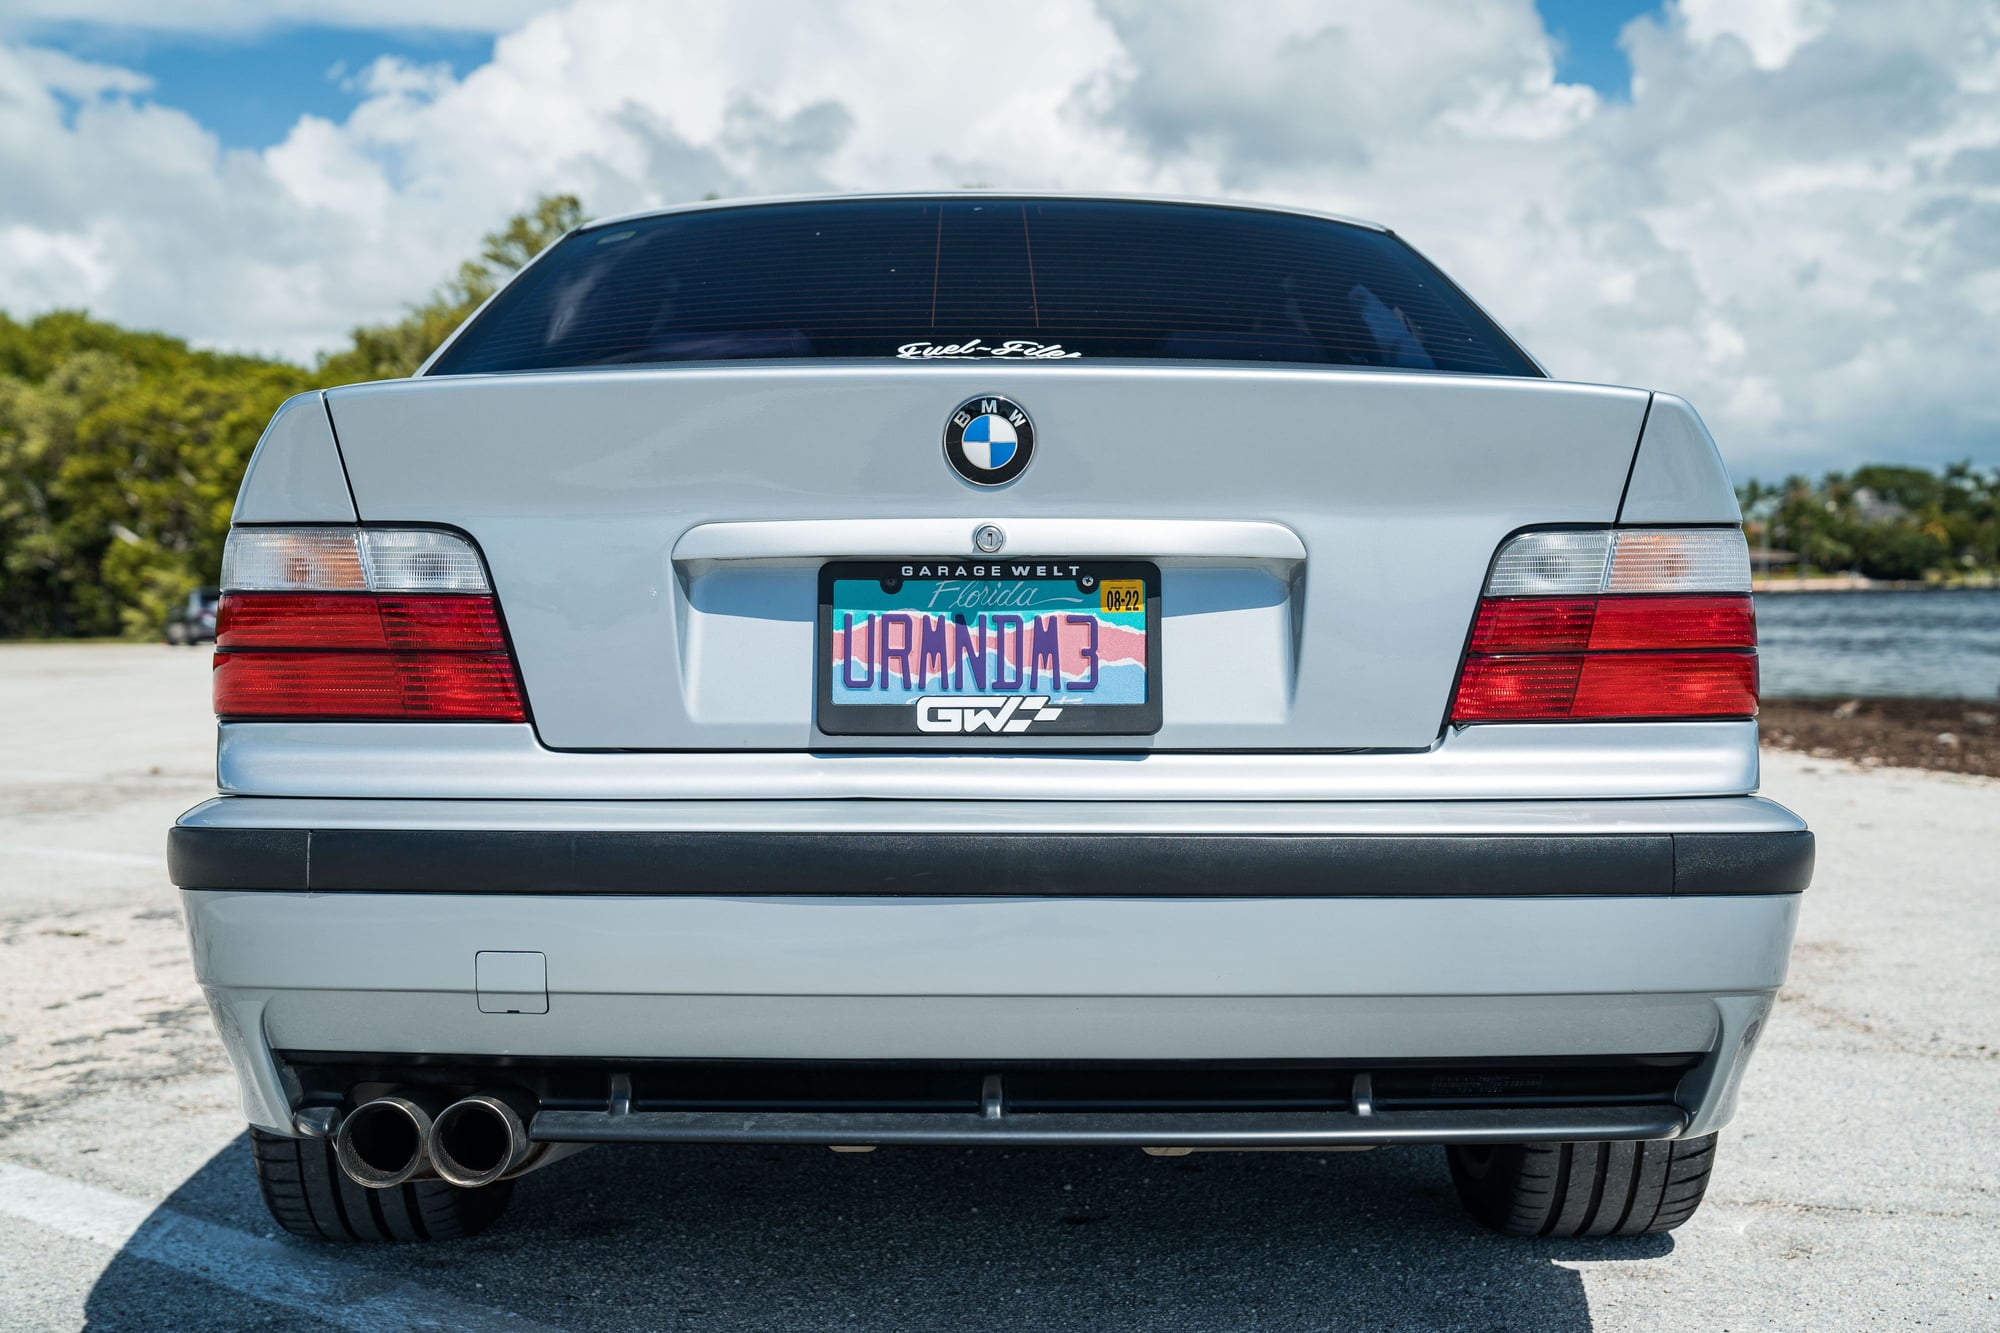 1997 BMW M3 - 1997 Dinan Stage 3 Supercharged M3 Sedan #'s matching - Used - VIN WBSCD9324VEE05383 - 112,250 Miles - 6 cyl - 2WD - Manual - Sedan - Silver - Miami, FL 33178, United States